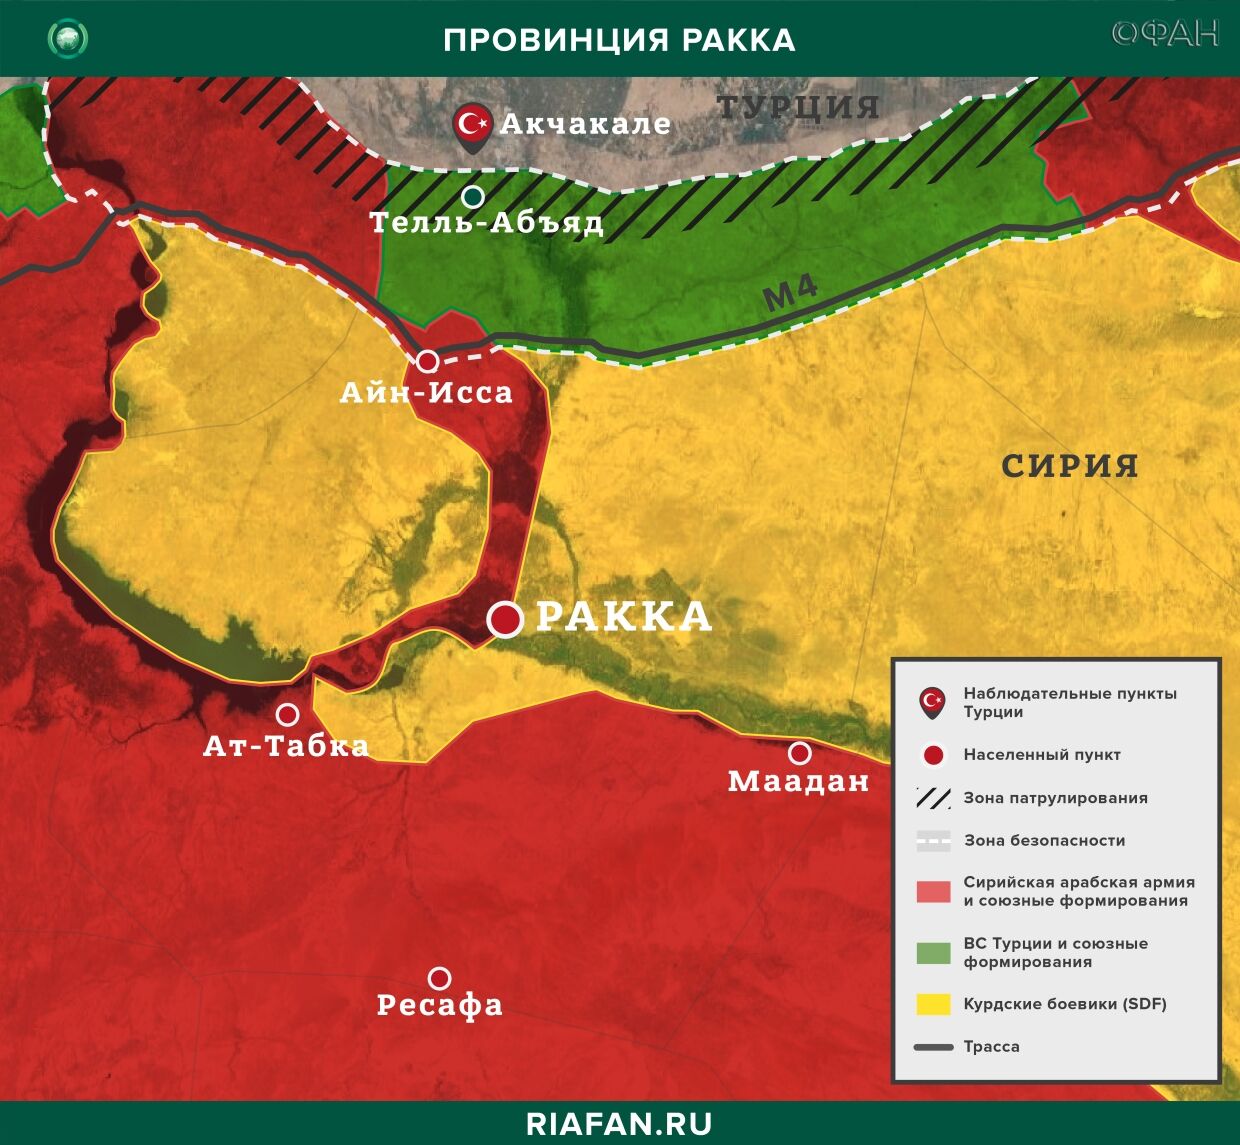 Syria the results of the day on 14 April 06.00: HTSh confronted the Turks in Idlib, Syrian injured in explosion in Afrin